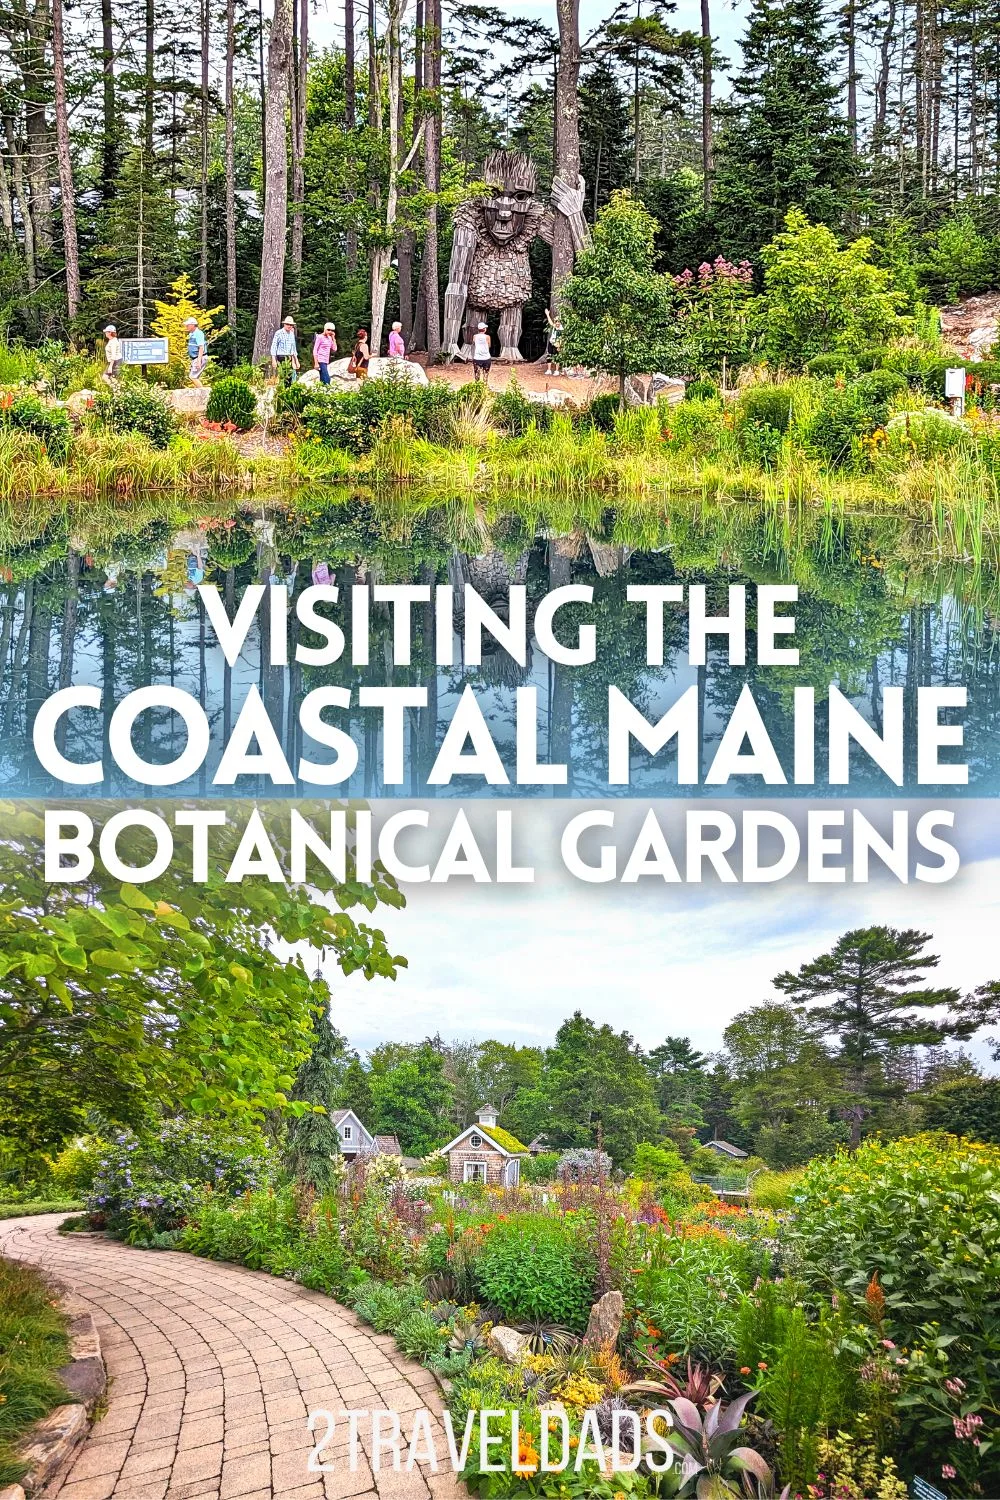 This is everything you need to know about visiting the Coastal Maine Botanical Gardens, from the famous Trolls to special events. Details about seasonal happening and types of gardens found at the CMBG in Boothbay on the Midcoast.